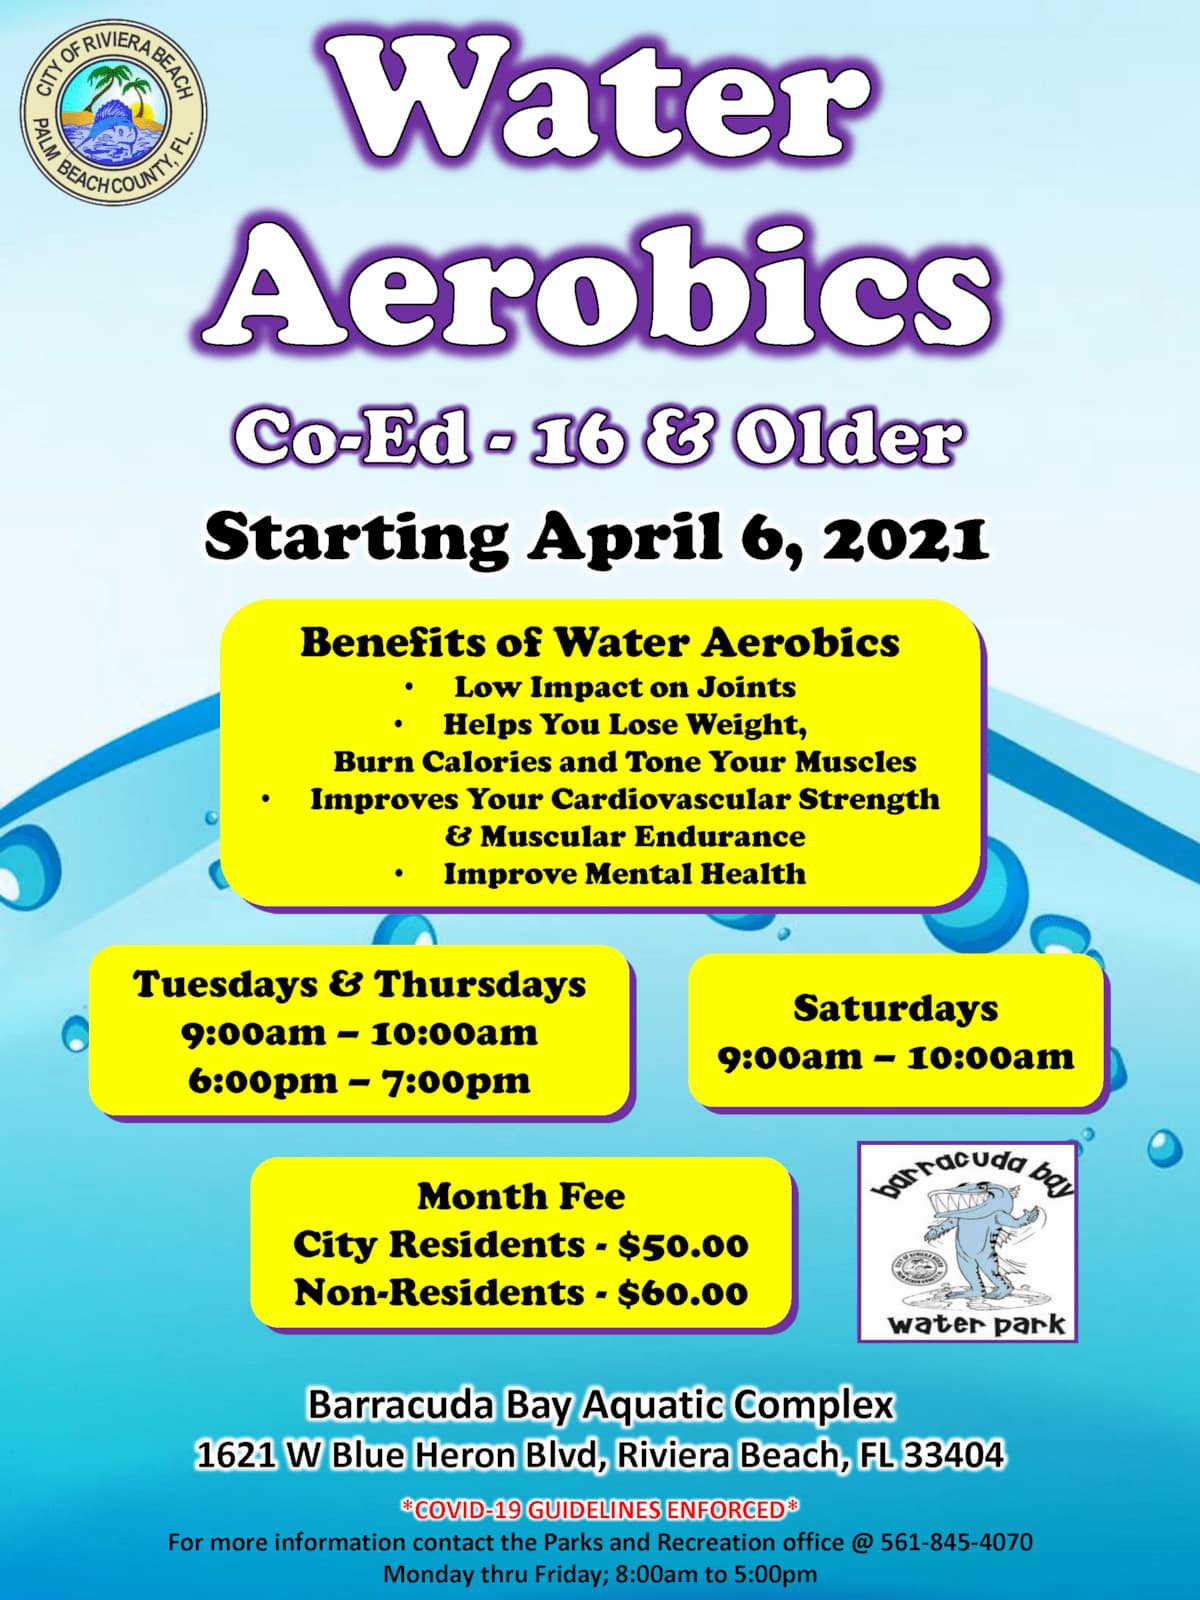 Water Aerobics co-ed 16 or older Starting April 6 Please contact Parks at 561-845-4070 for any questions 